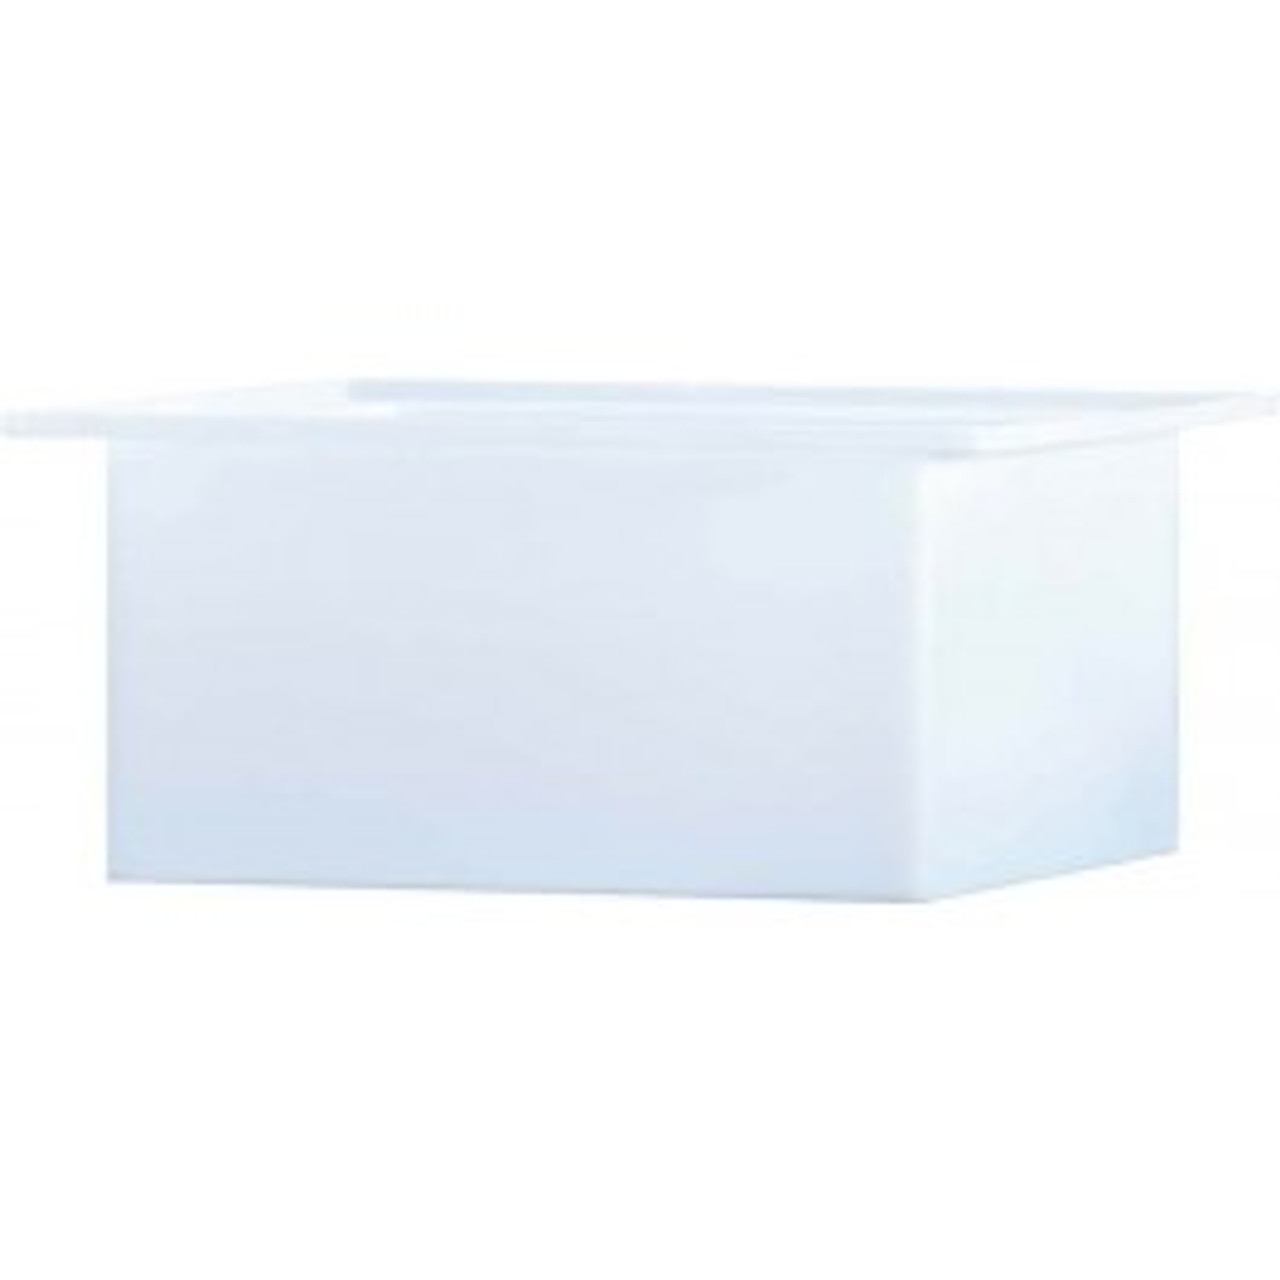 An image of a 15 Gallon PE Chem-Tainer White Rectangular Open Top Tank | R122412A